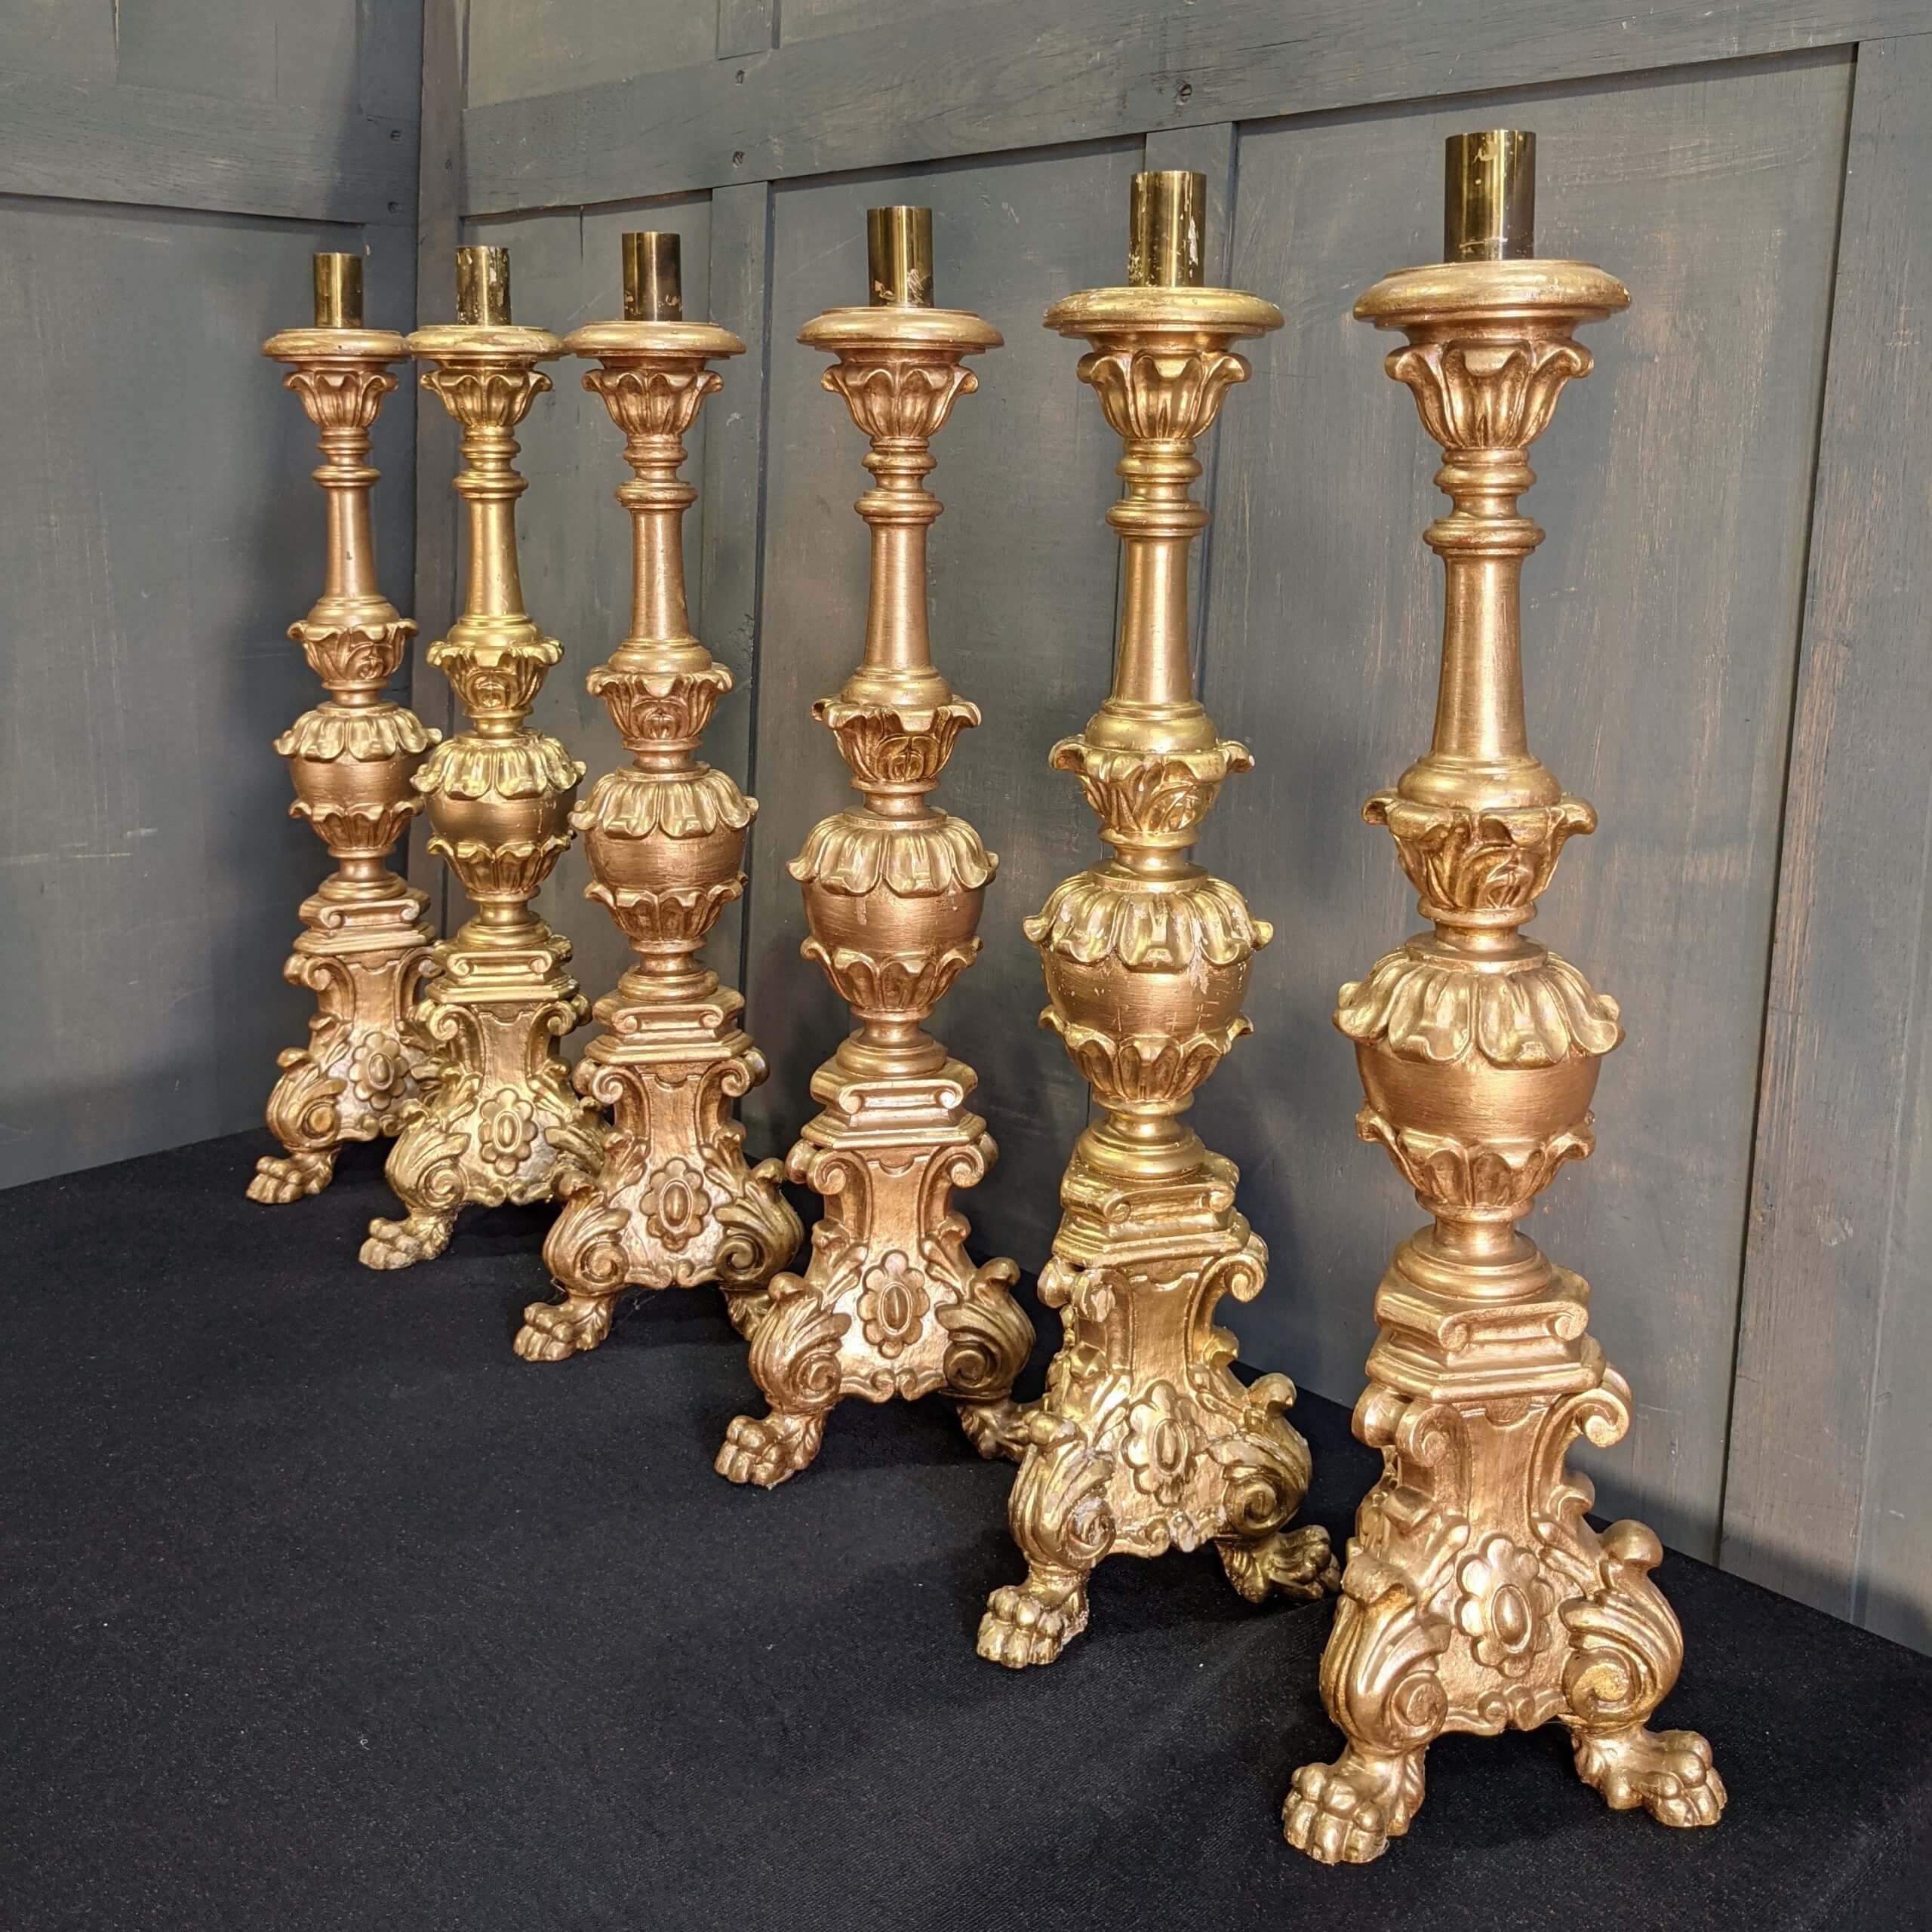 Carved Wooden Vintage Baroque Style 'Big 6' Church Altar Candlesticks Set  (SOLD) - Antique Church Furnishings